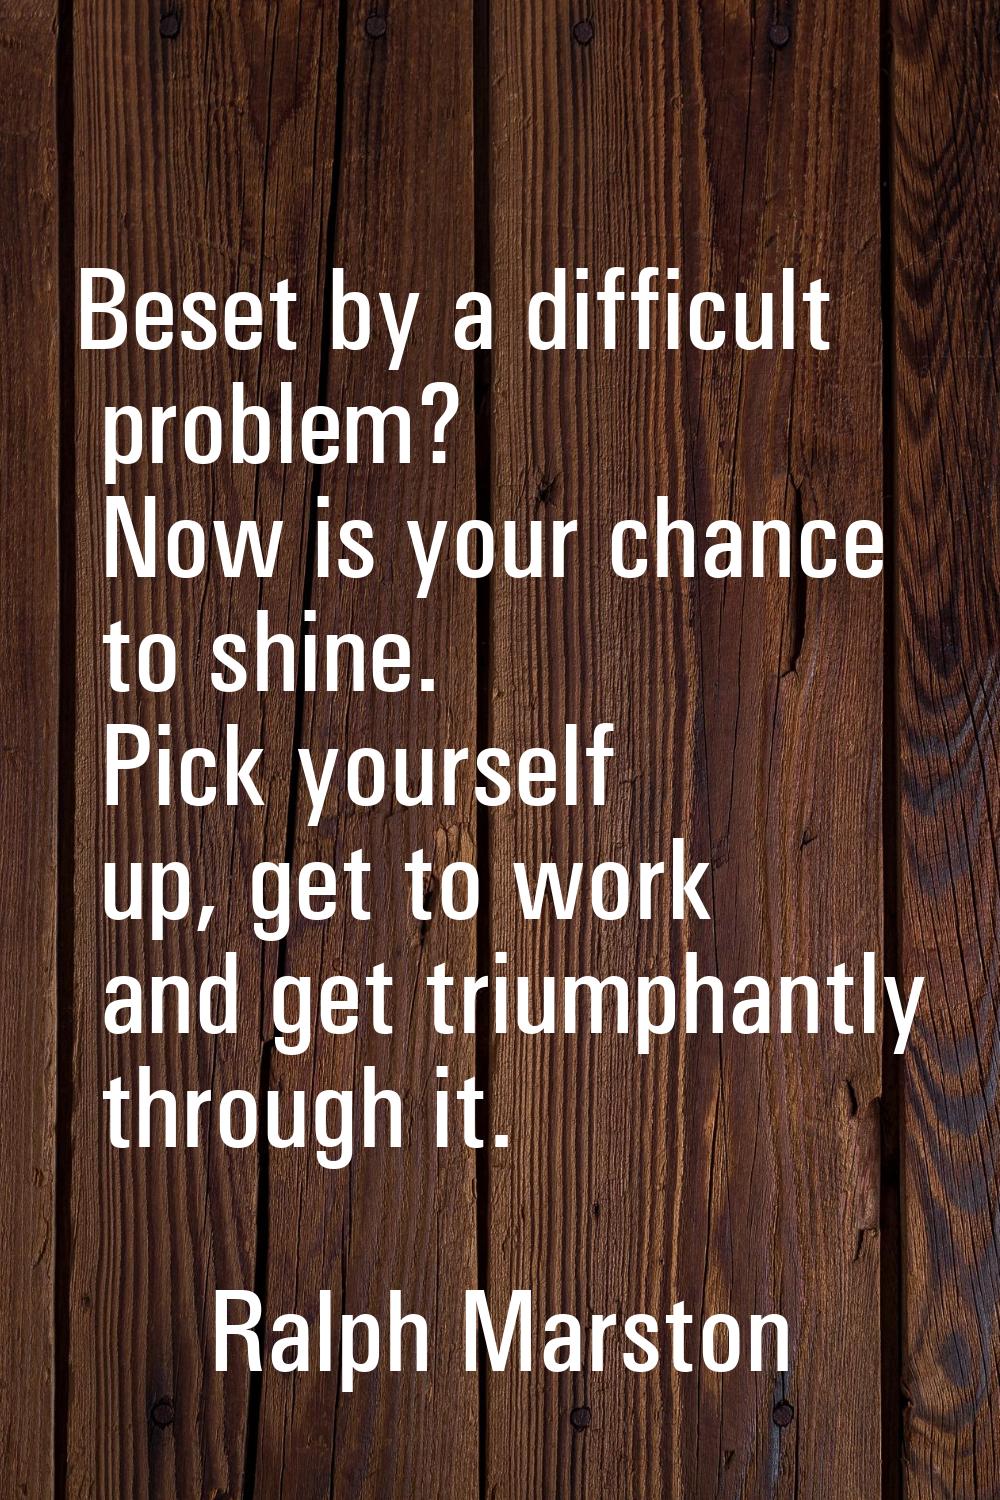 Beset by a difficult problem? Now is your chance to shine. Pick yourself up, get to work and get tr